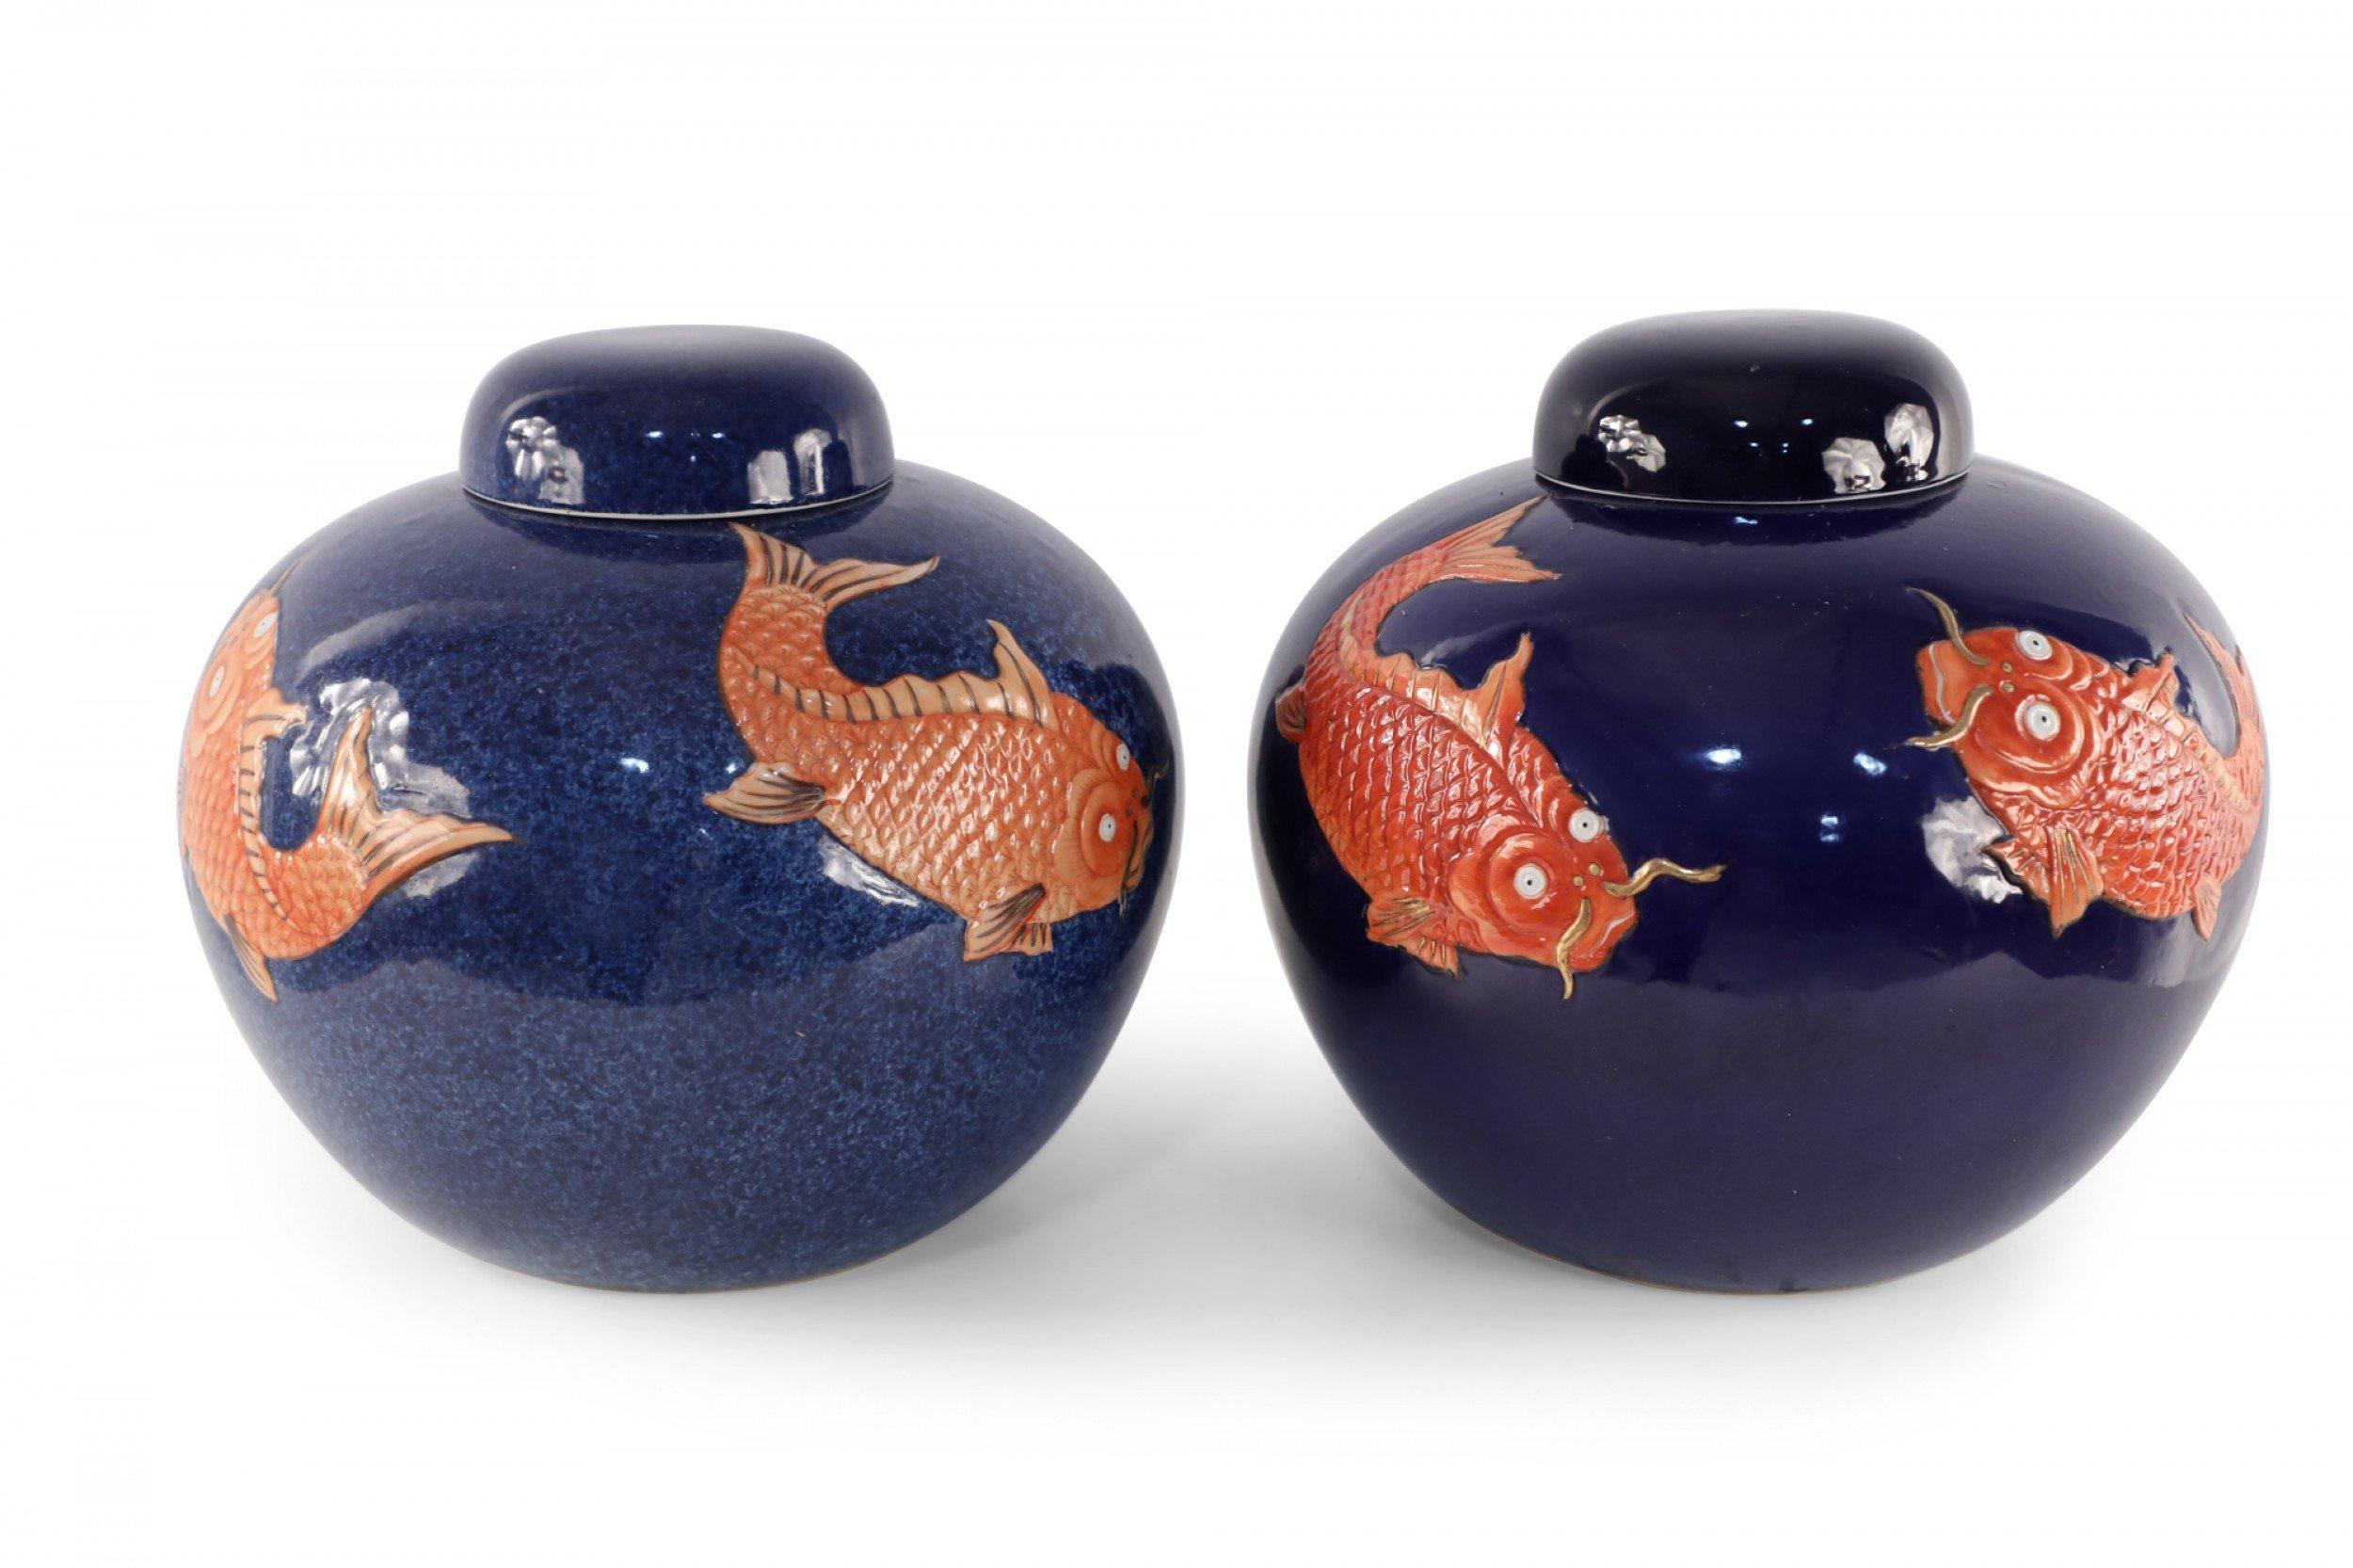 4 antique Chinese (Mid 20th Century) similar porcelain vases with orange fish swimming around blue backgrounds - some displaying sponged effects - inspired by patterns from the Ming Dynasty (vases vary in shape, size and pattern) (Priced Each).
  